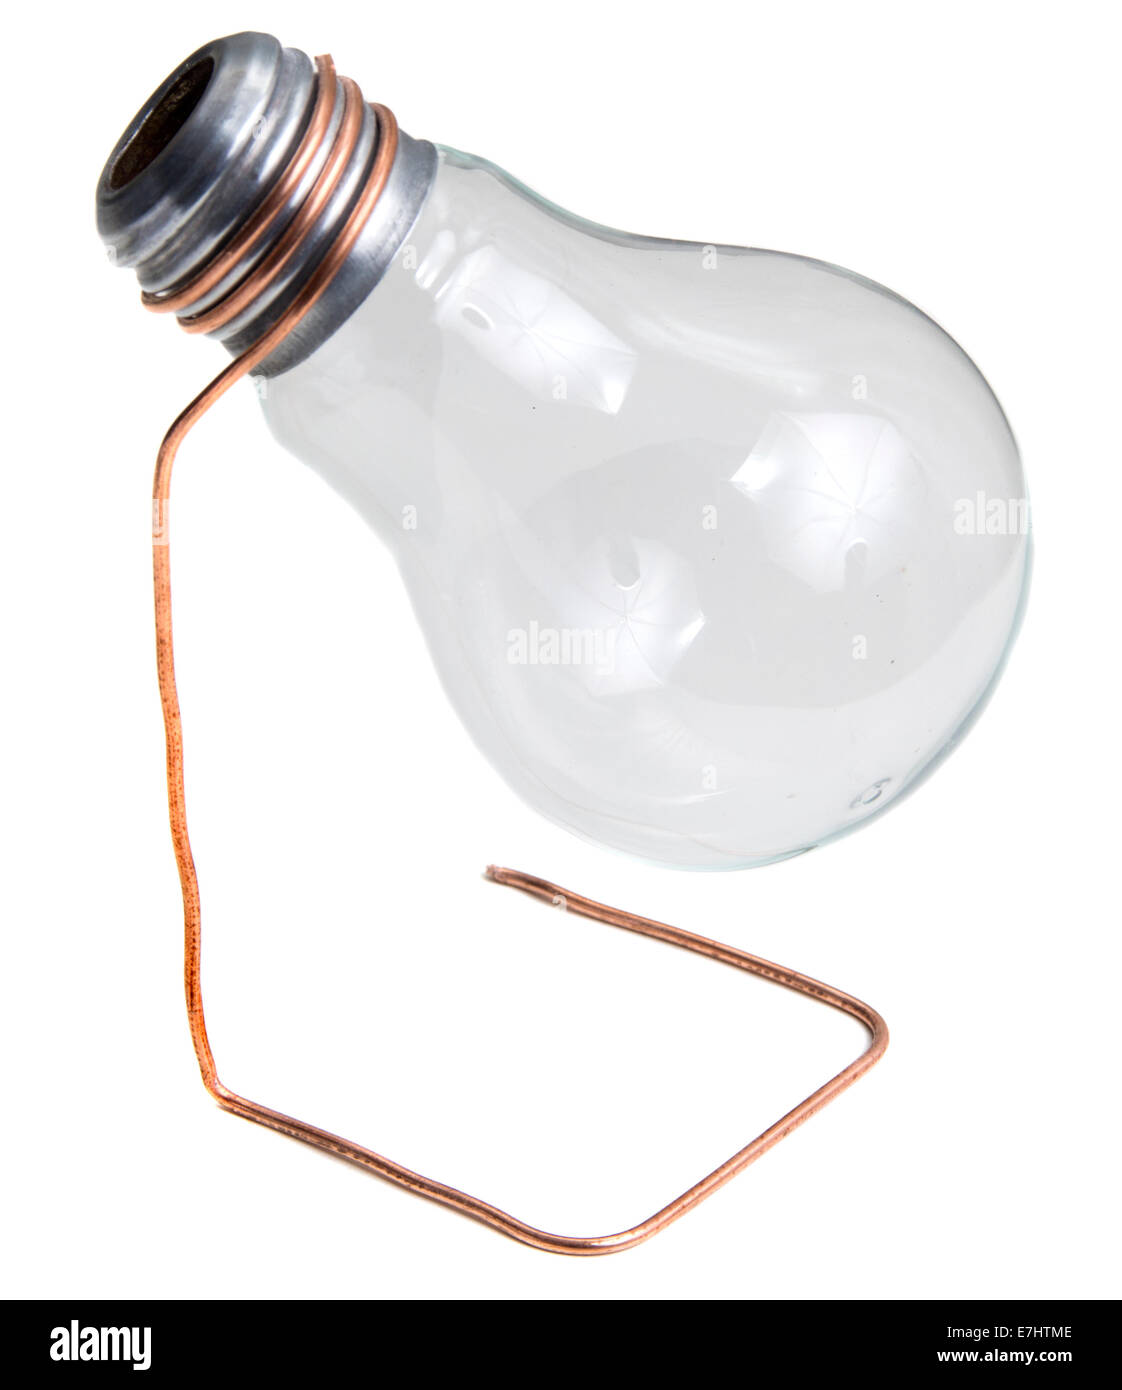 Vase made from electric bulb isolated over white background Stock Photo